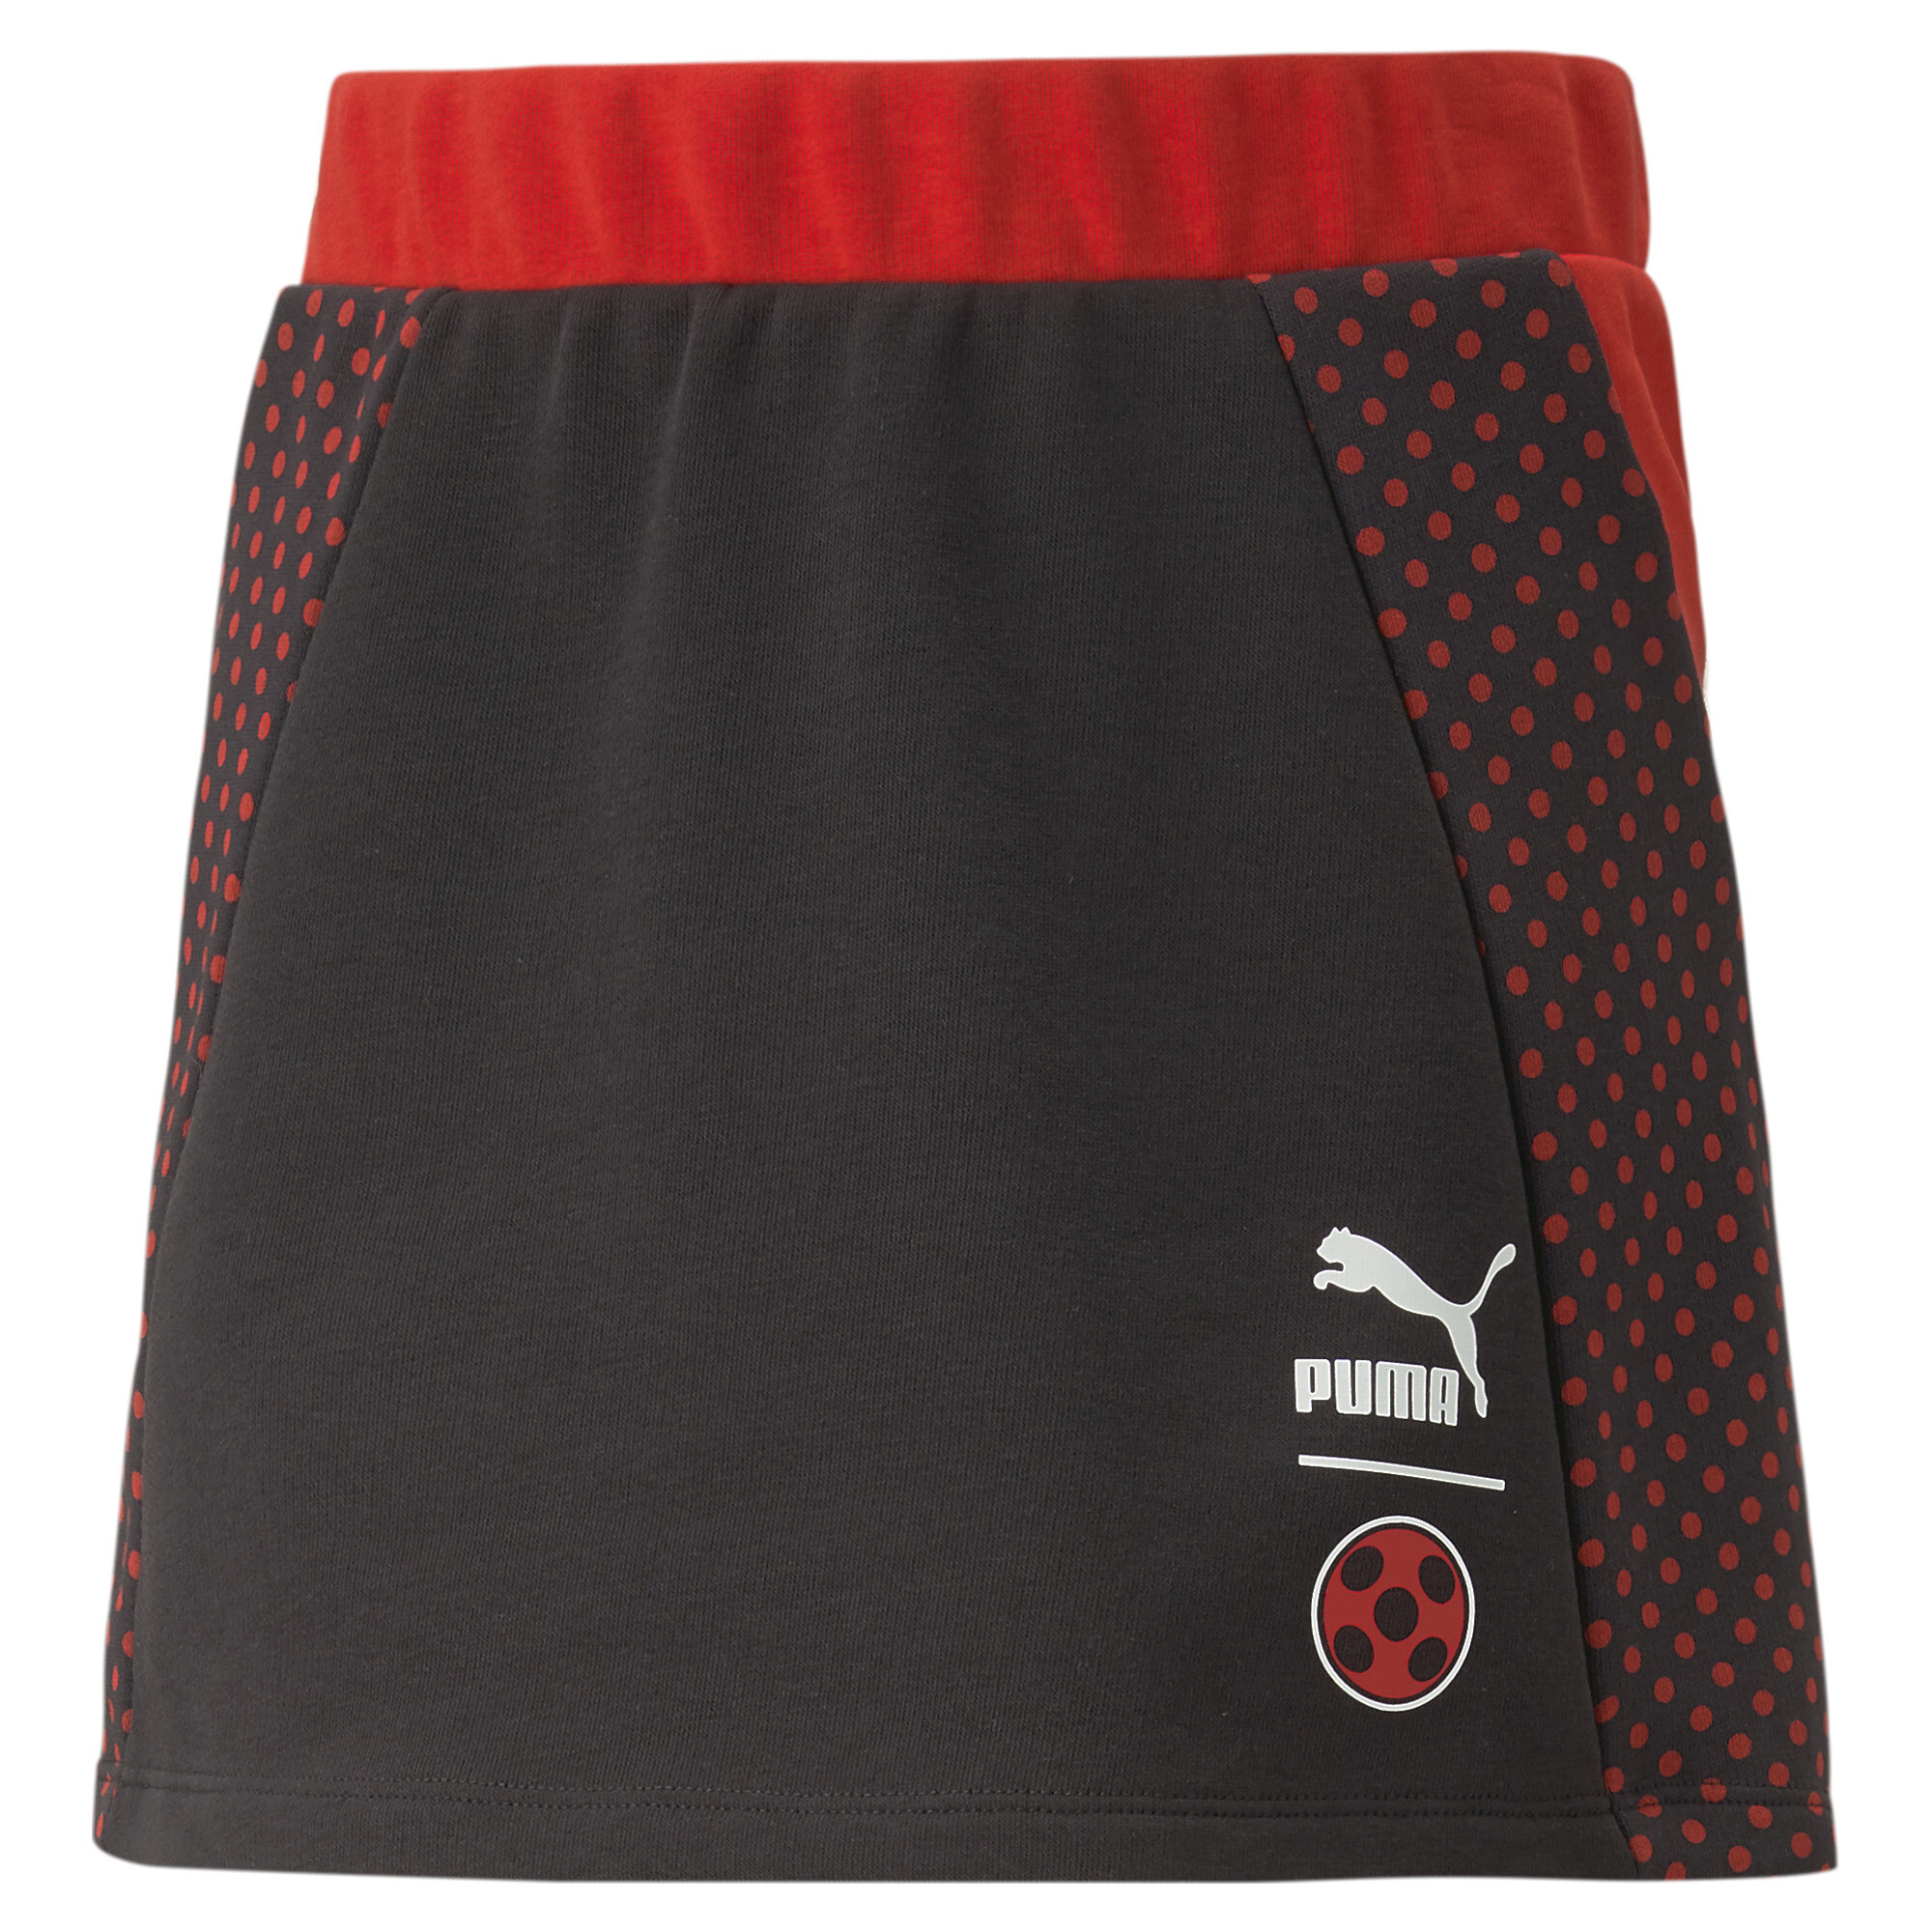 PUMA X MIRACULOUS Skirt In Black, Size 15-16 Youth